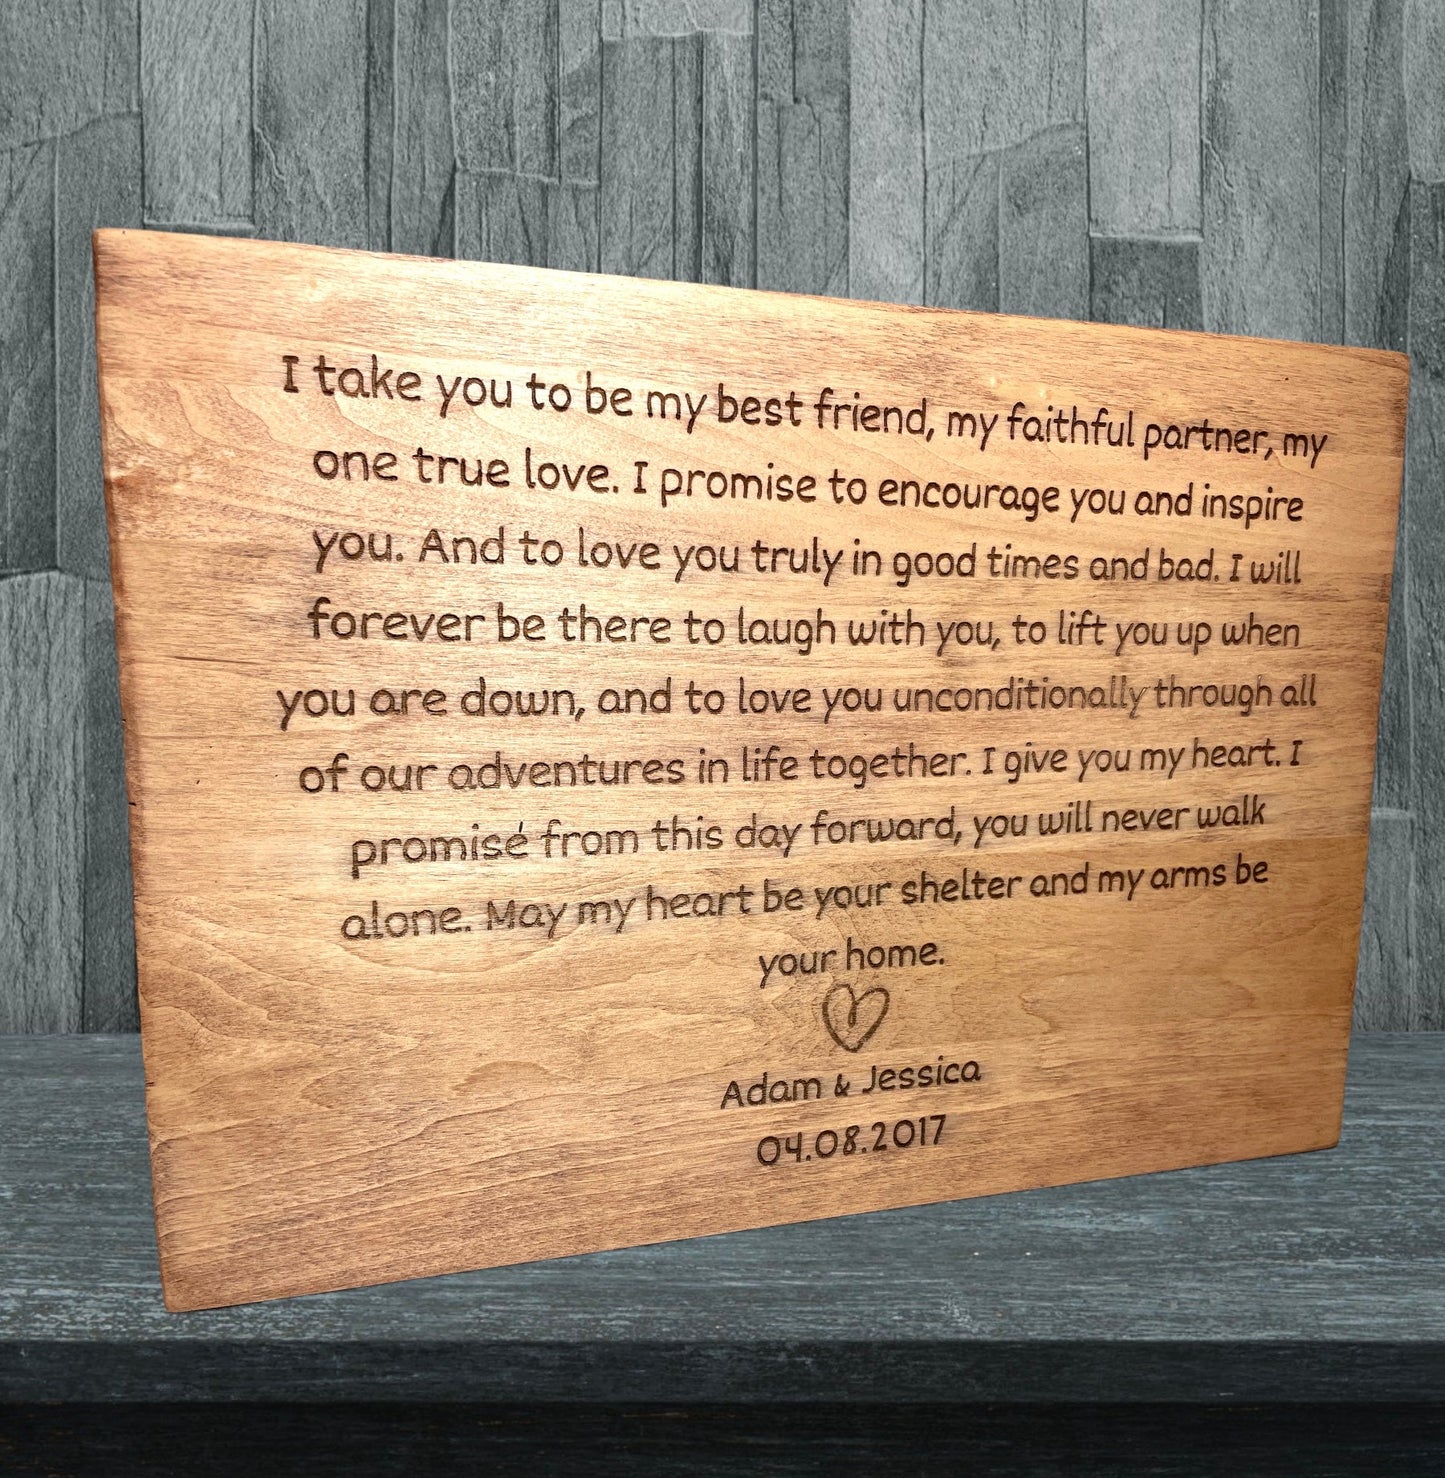 "I Take You To Be My Bestfriend" Wedding Vows Sign Signs Weaver Custom Engravings   